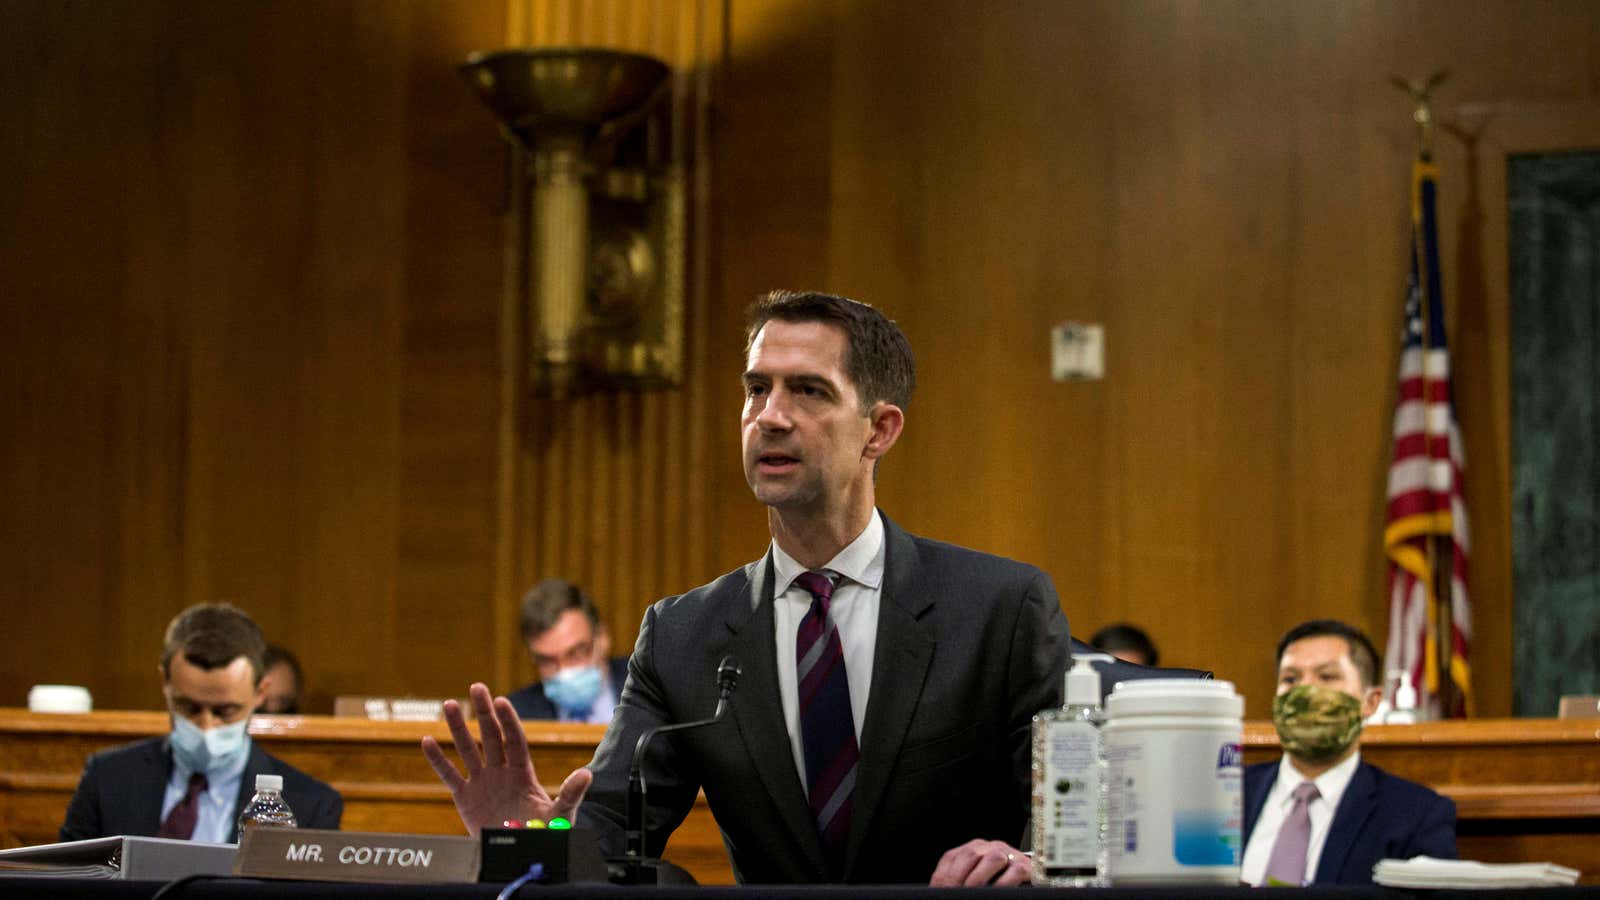 Senator Tom Cotton doesn’t want more immigrants coming to the US.